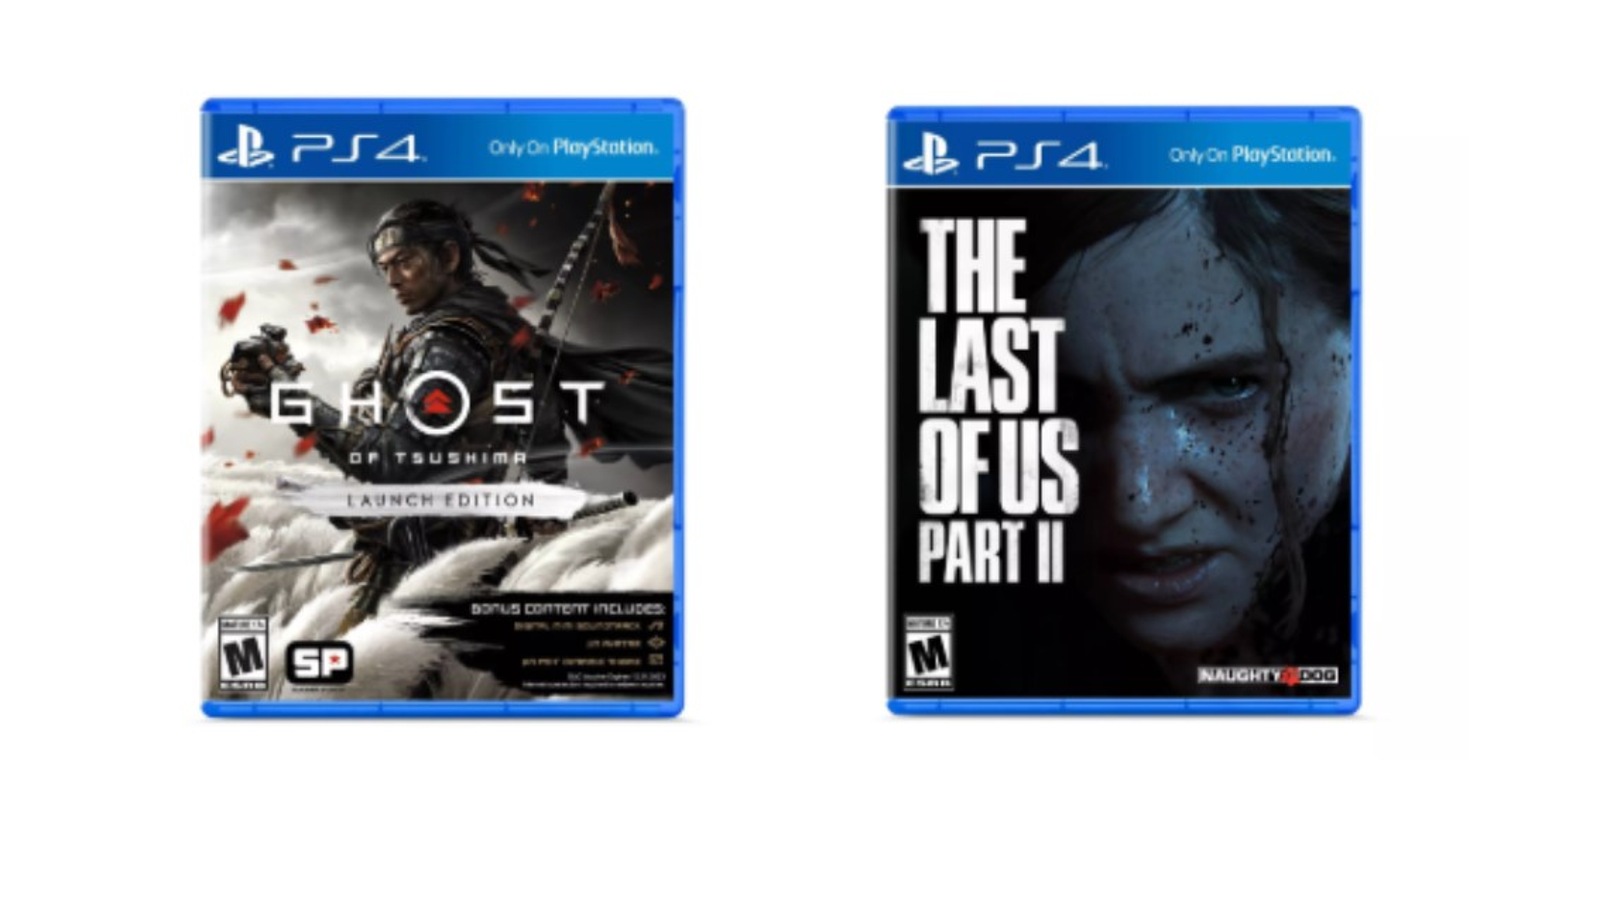 PS4 releases The Last of Us 2 special edition bundle for preorder